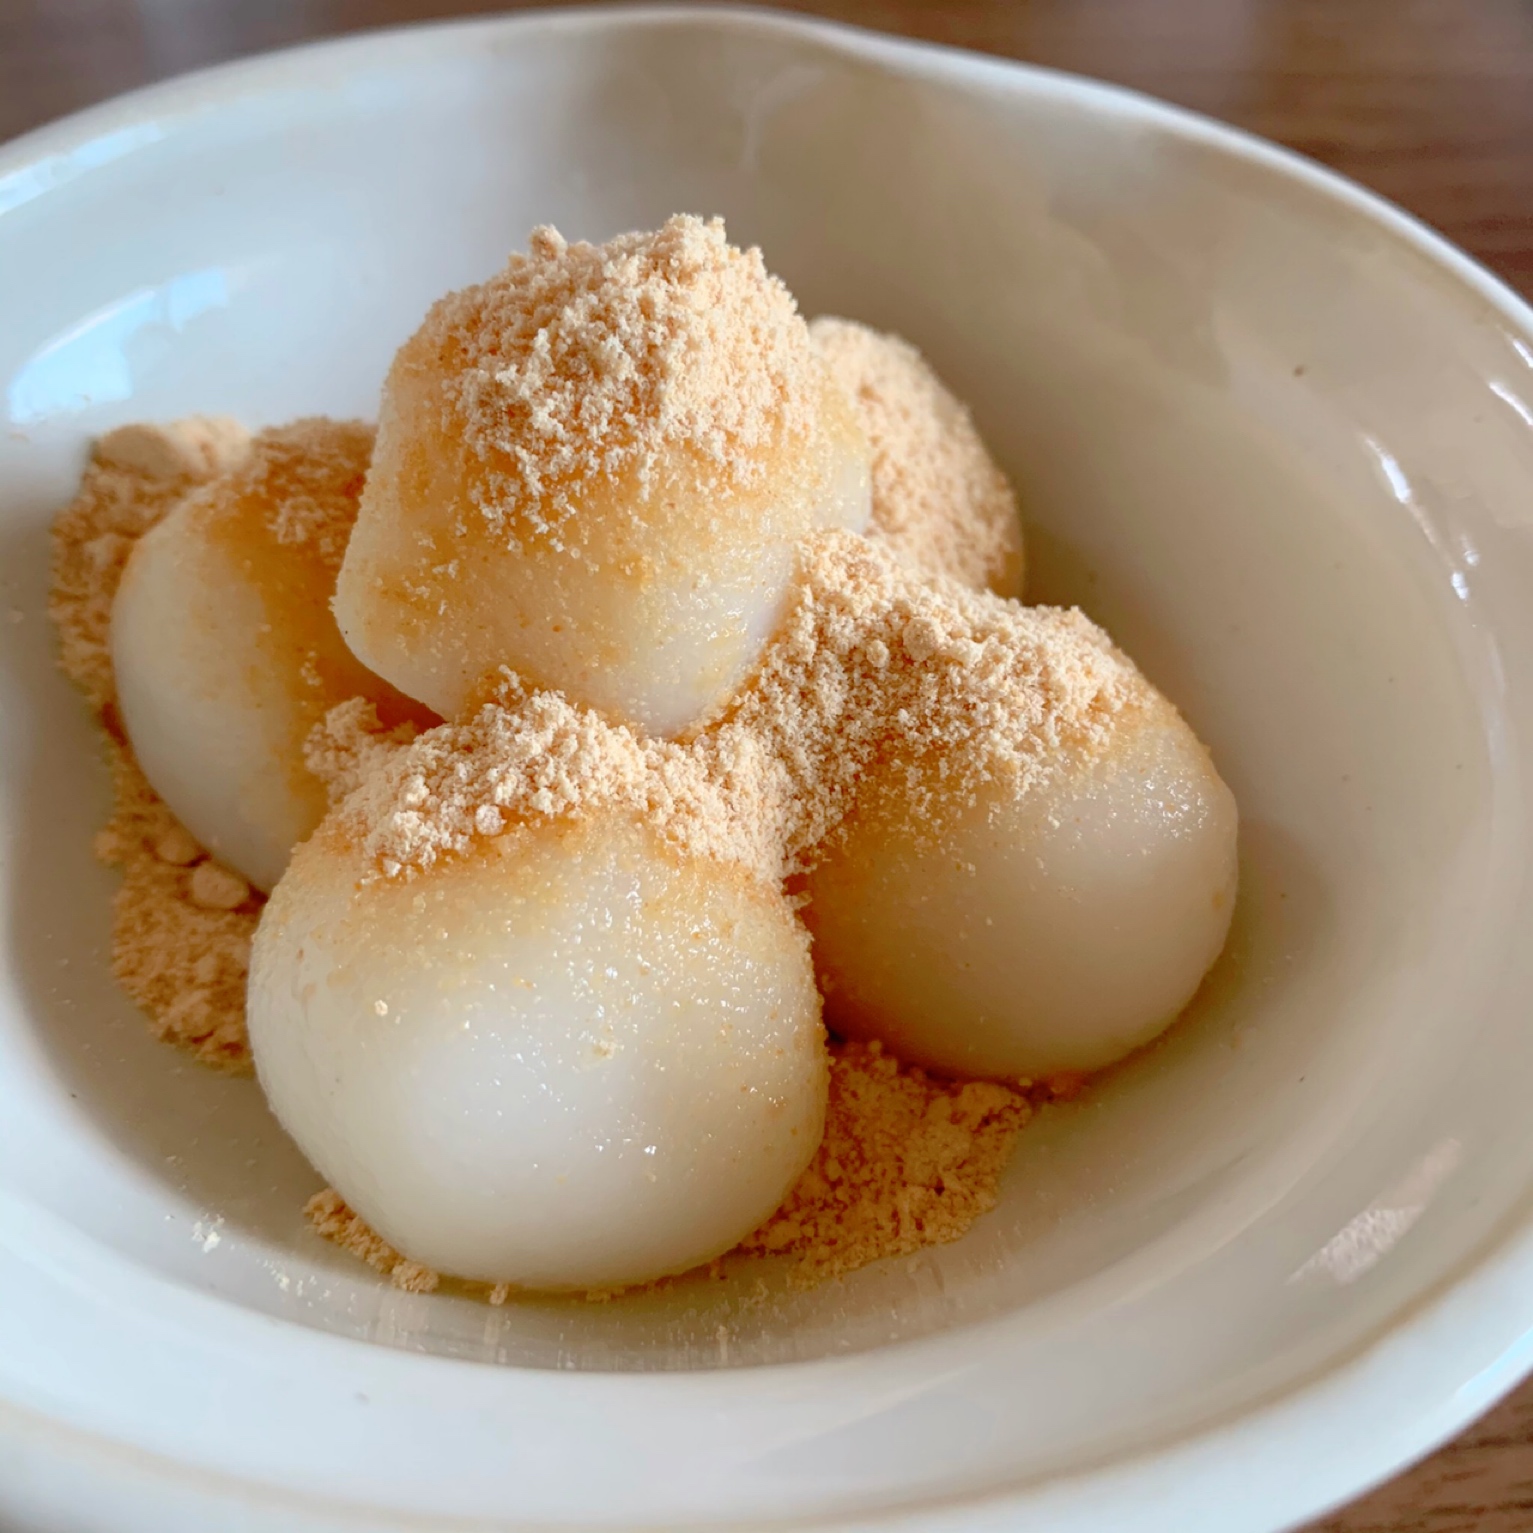 I made a small ball-shaped rice cake with shiratama flour and sprinkled it with soybean flour.